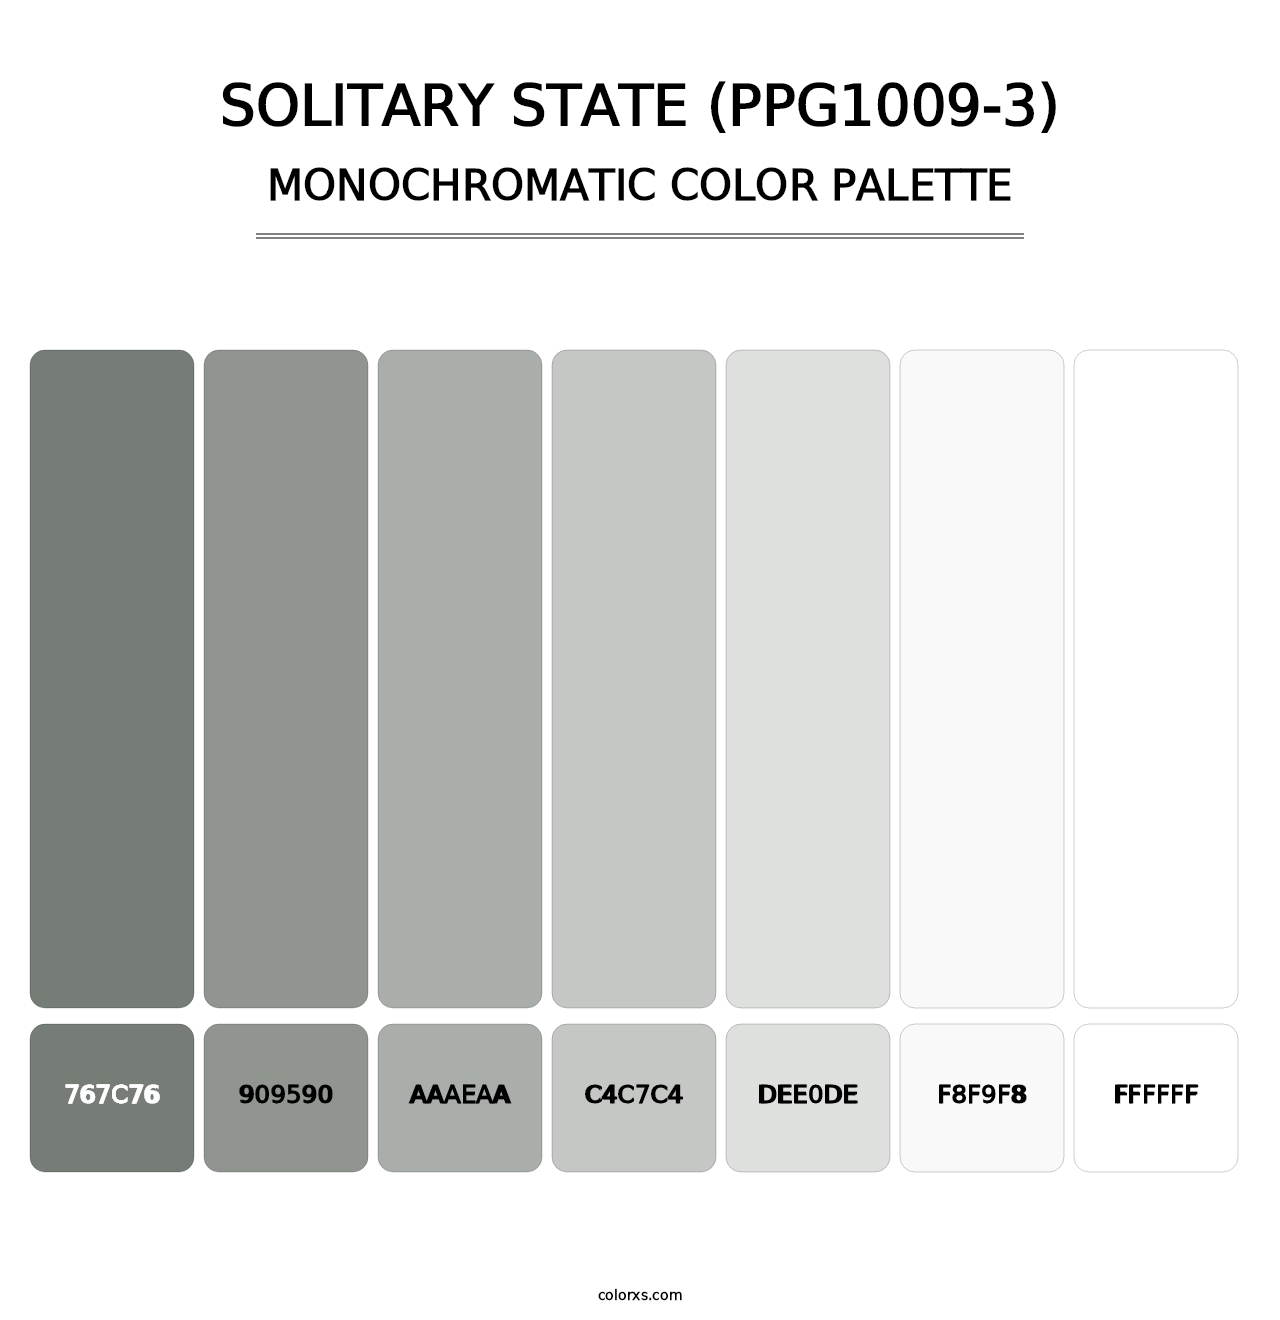 Solitary State (PPG1009-3) - Monochromatic Color Palette